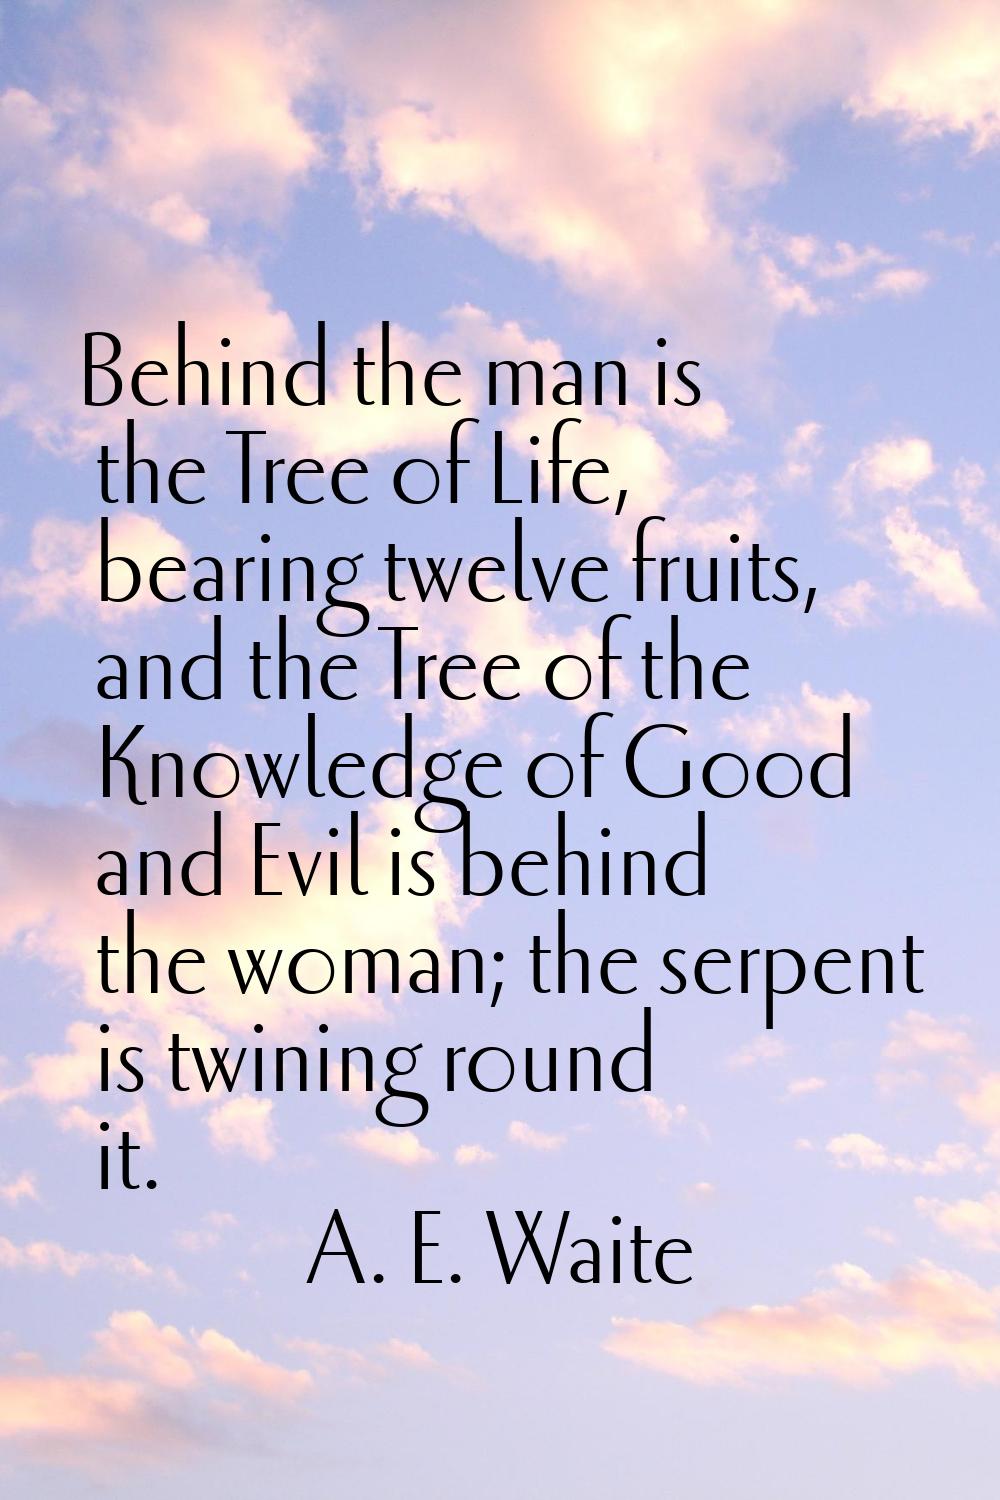 Behind the man is the Tree of Life, bearing twelve fruits, and the Tree of the Knowledge of Good an